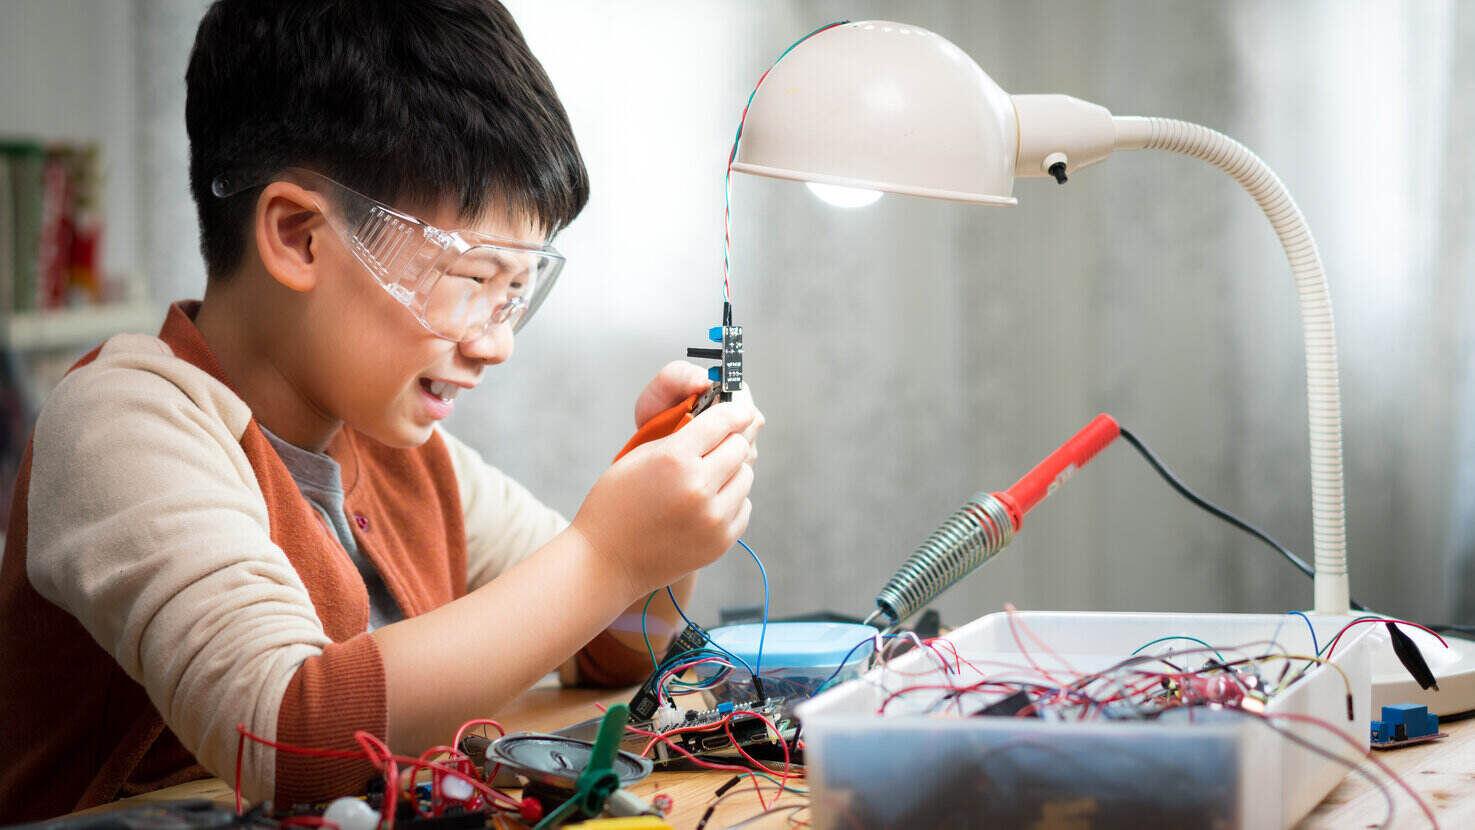 Student assembles circuits at table with passion